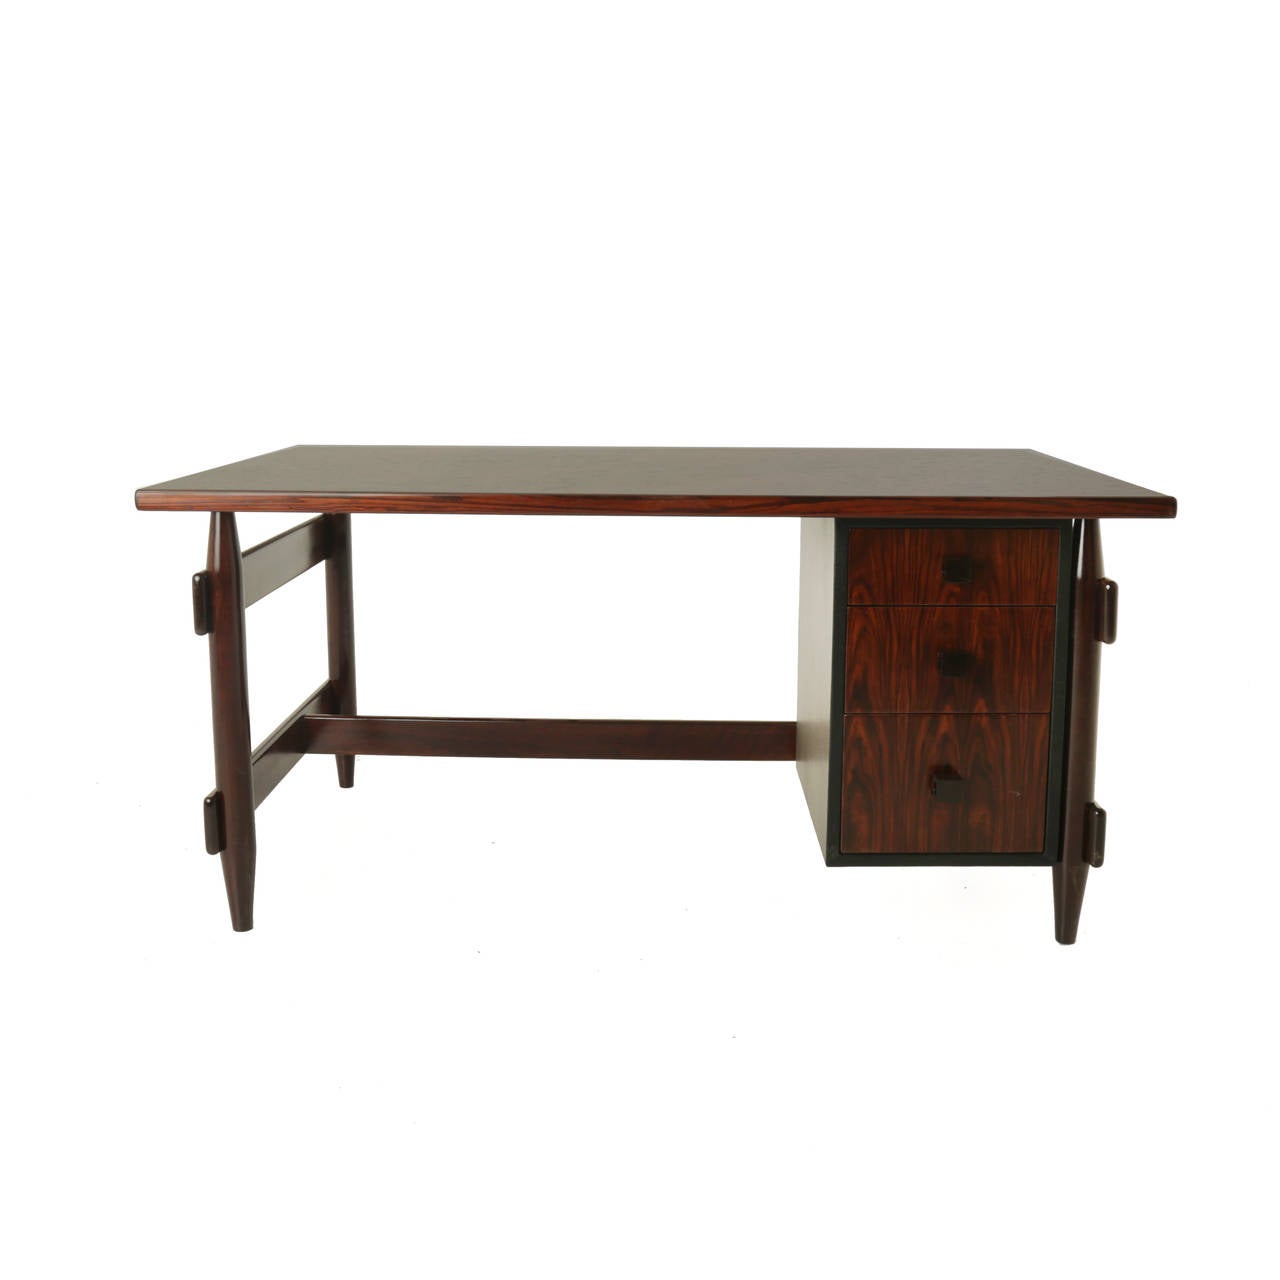 Solid rosewood desk from Brazil with tapered legs and three drawers for storage. The handles are solid wood as well. 

 